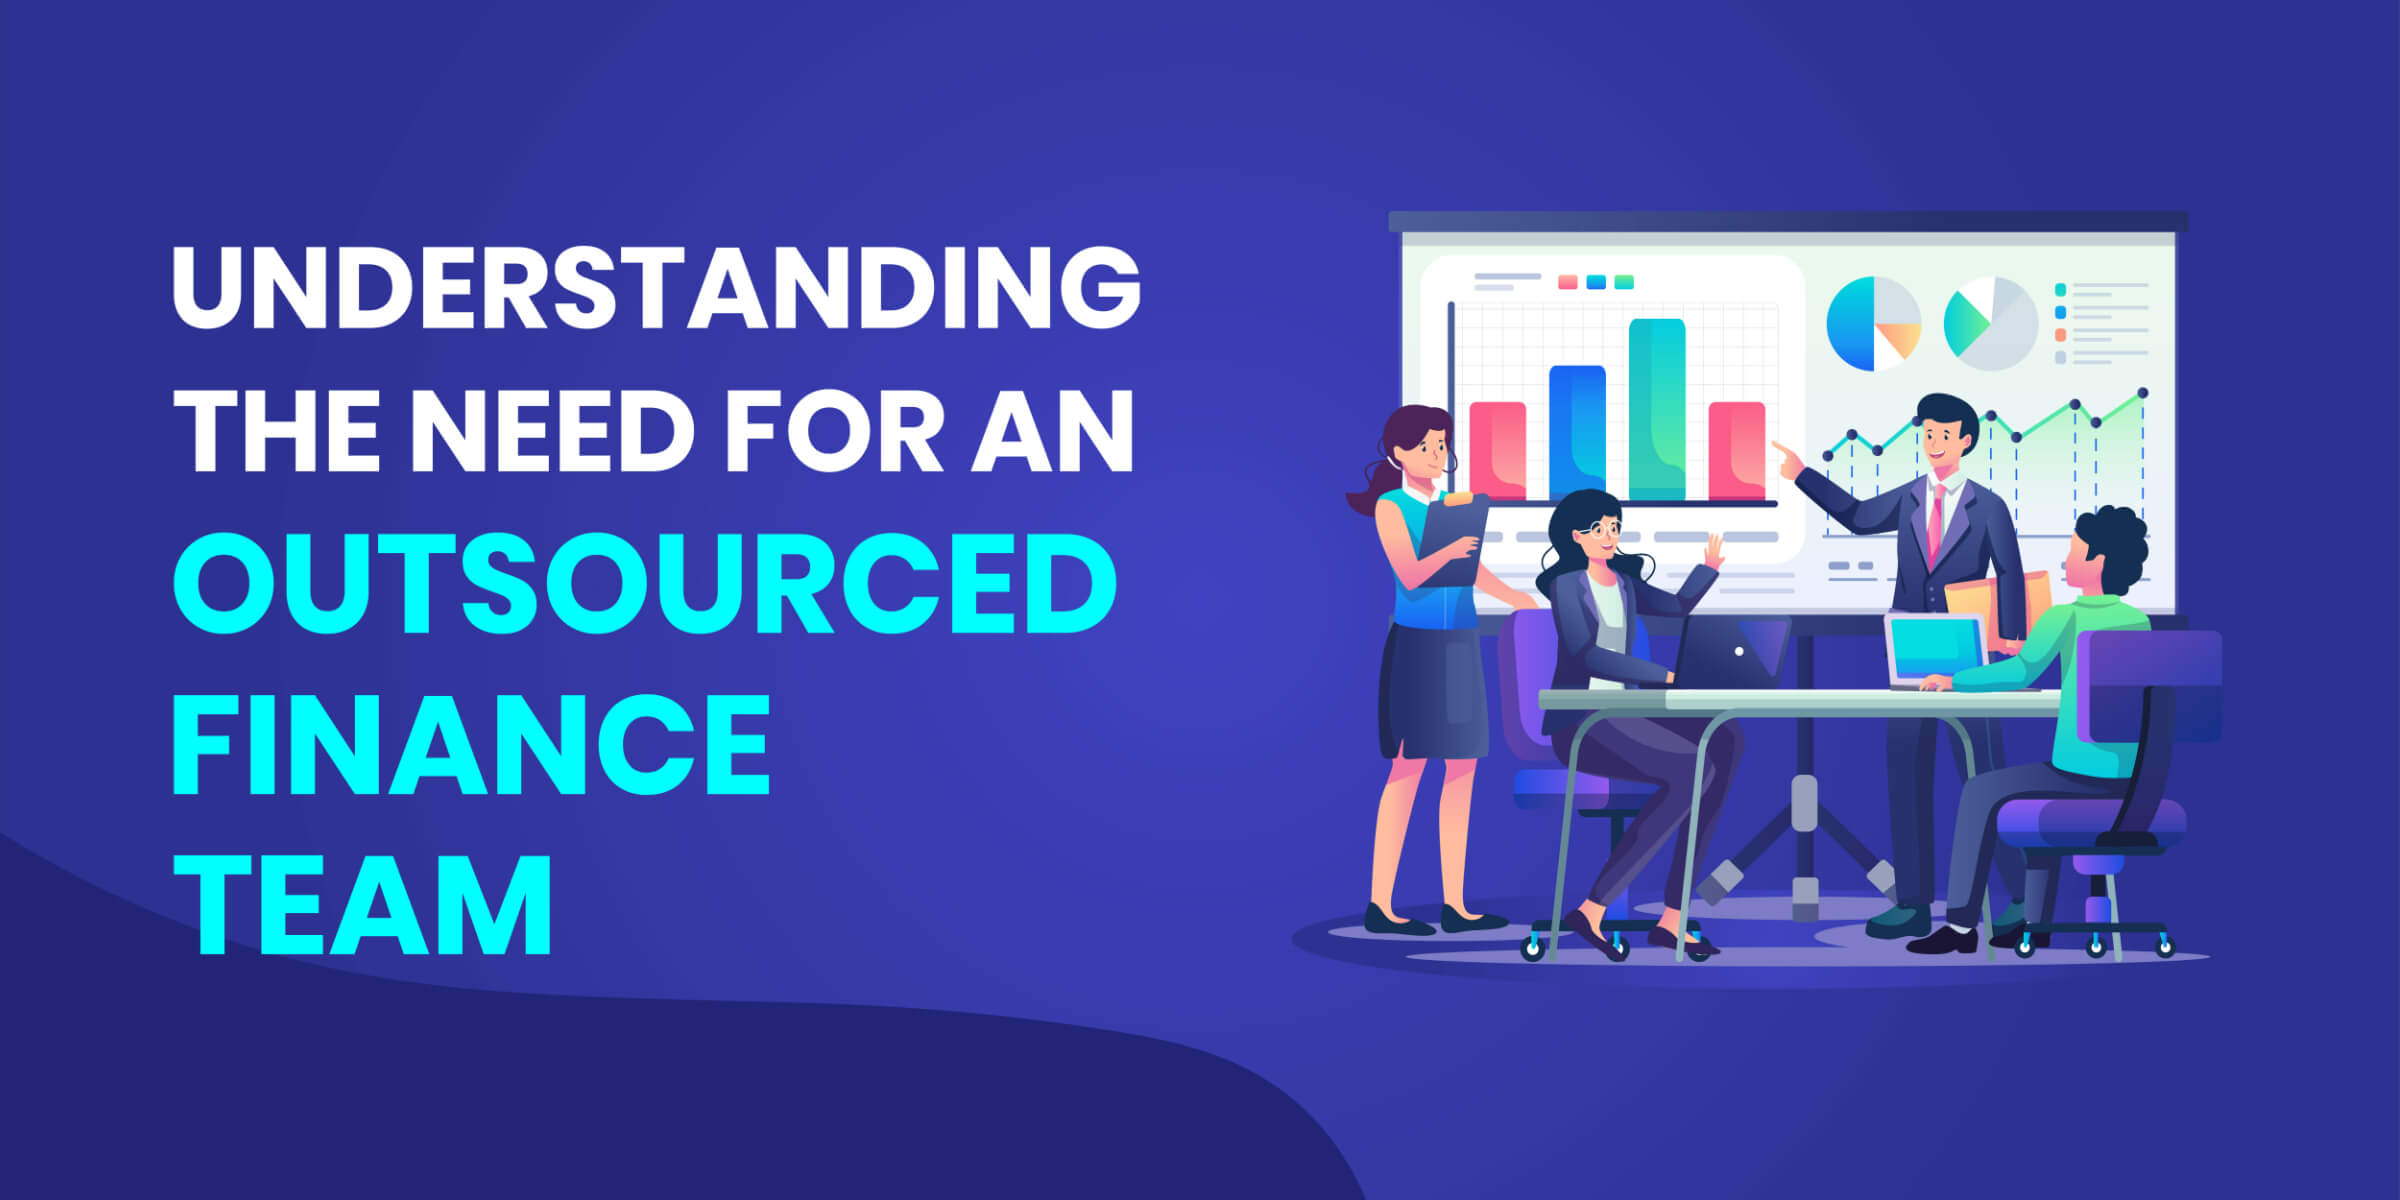 Understanding the Need for Outsourced Finance Team